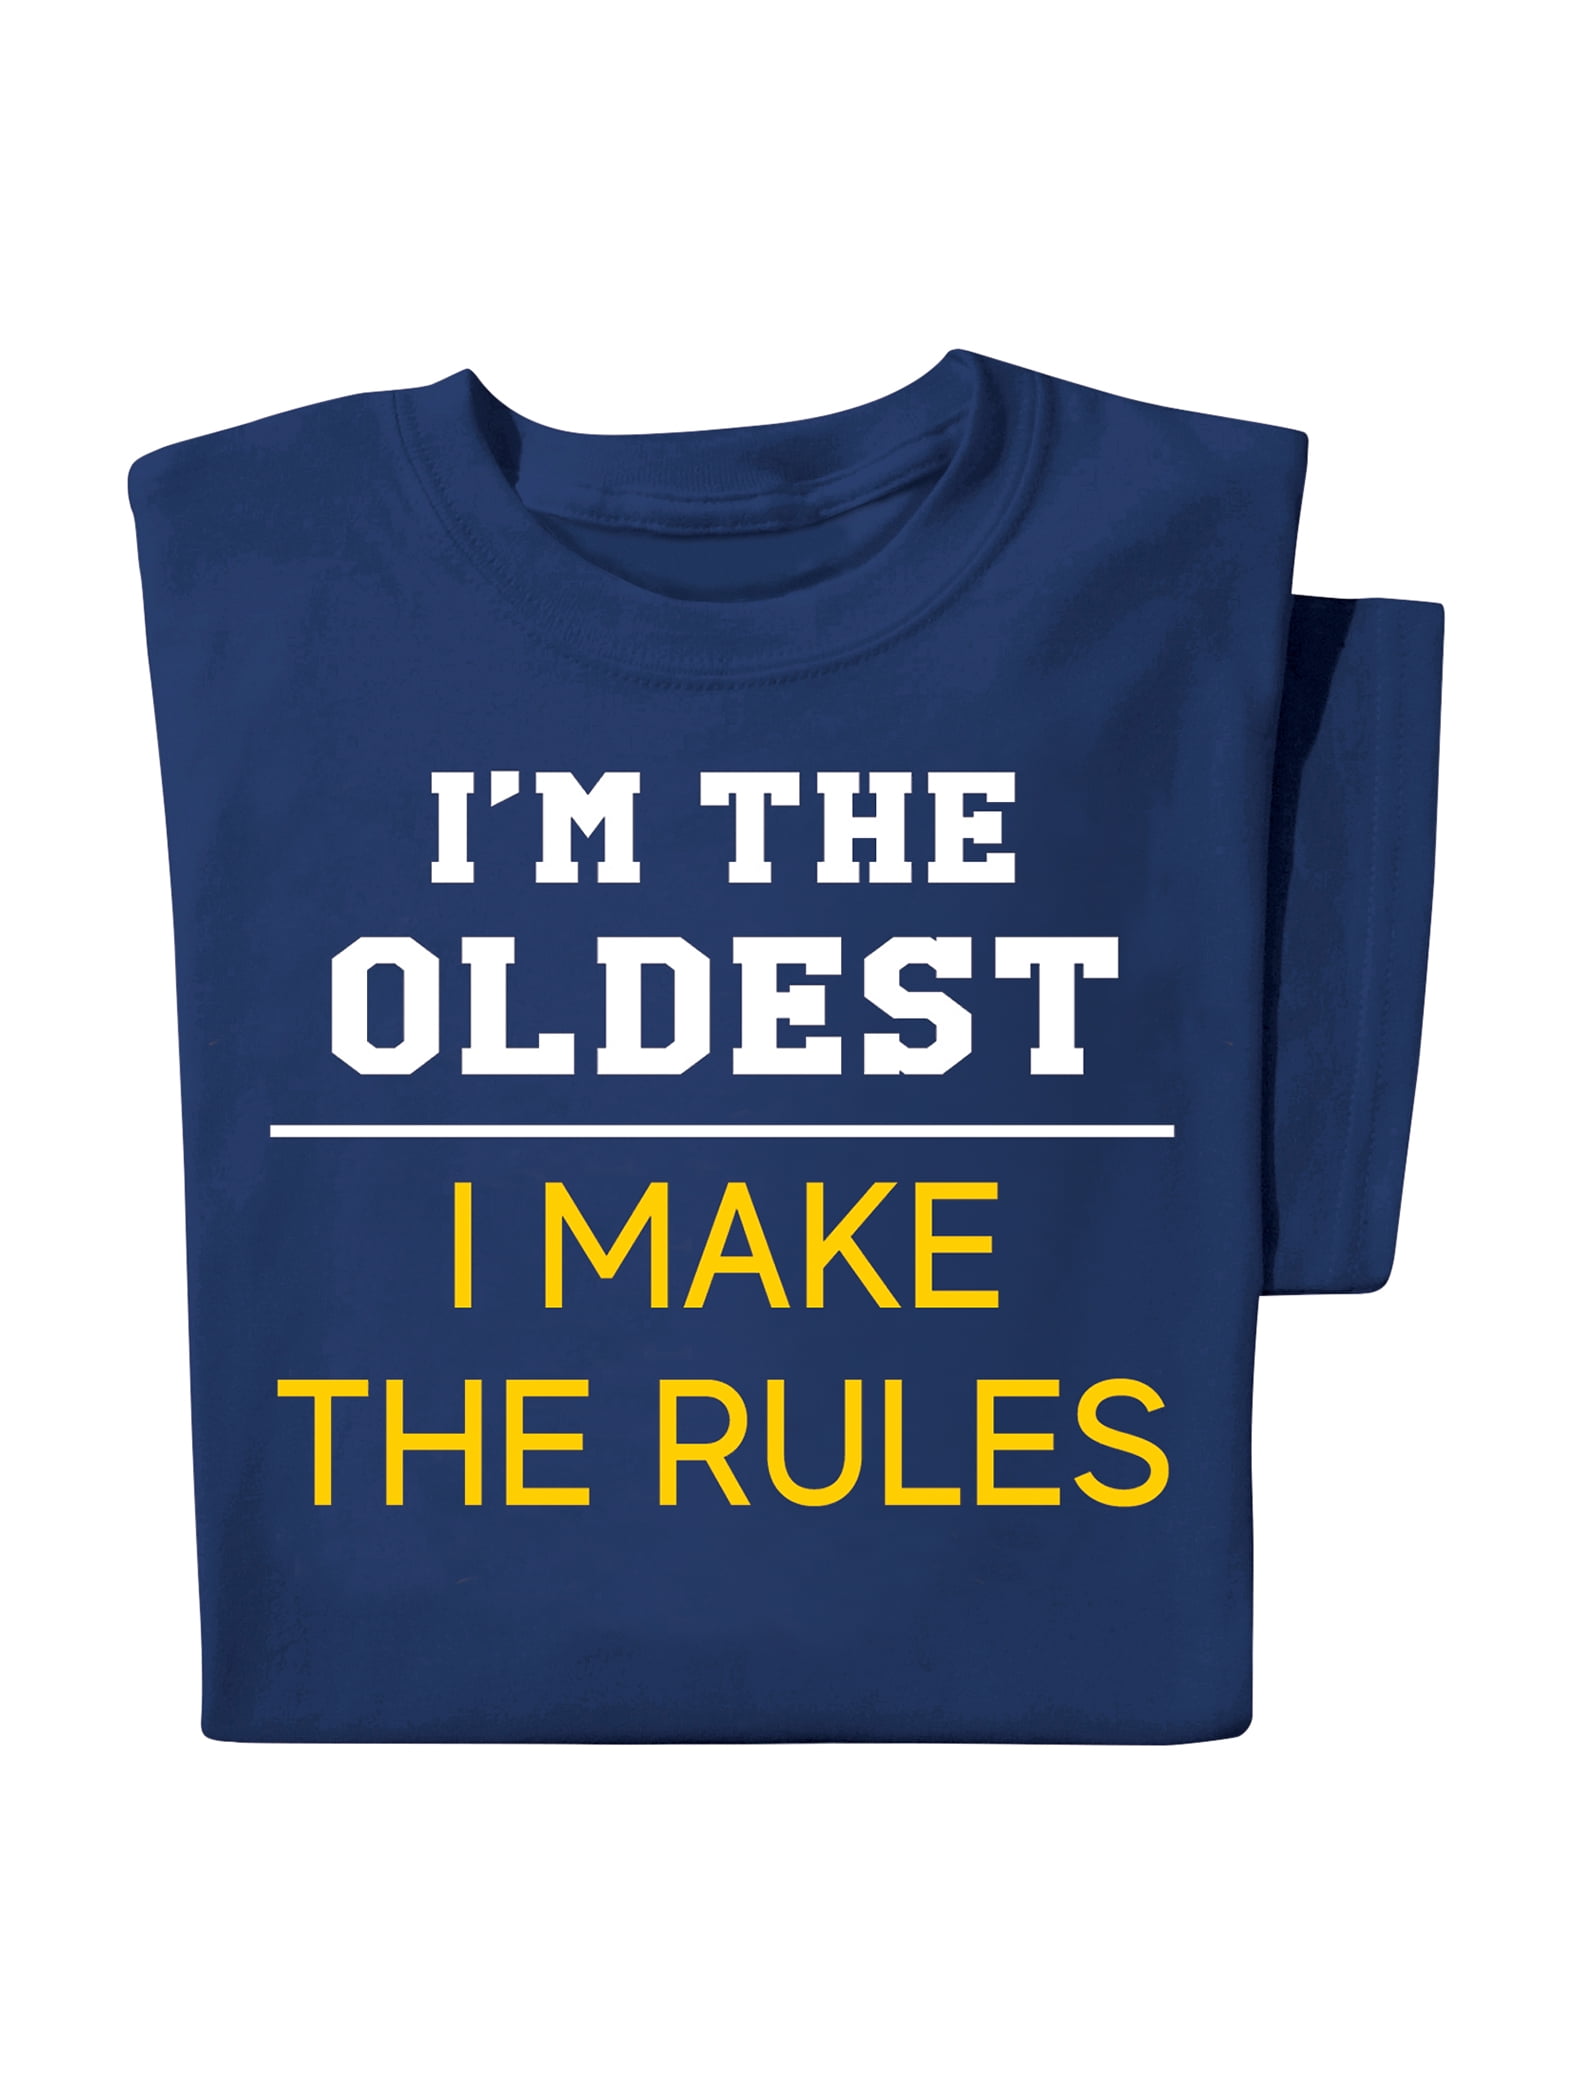 Oldest Child 3 Make The Rules Funny Novelty Tops T-Shirt Womens tee TShirt 